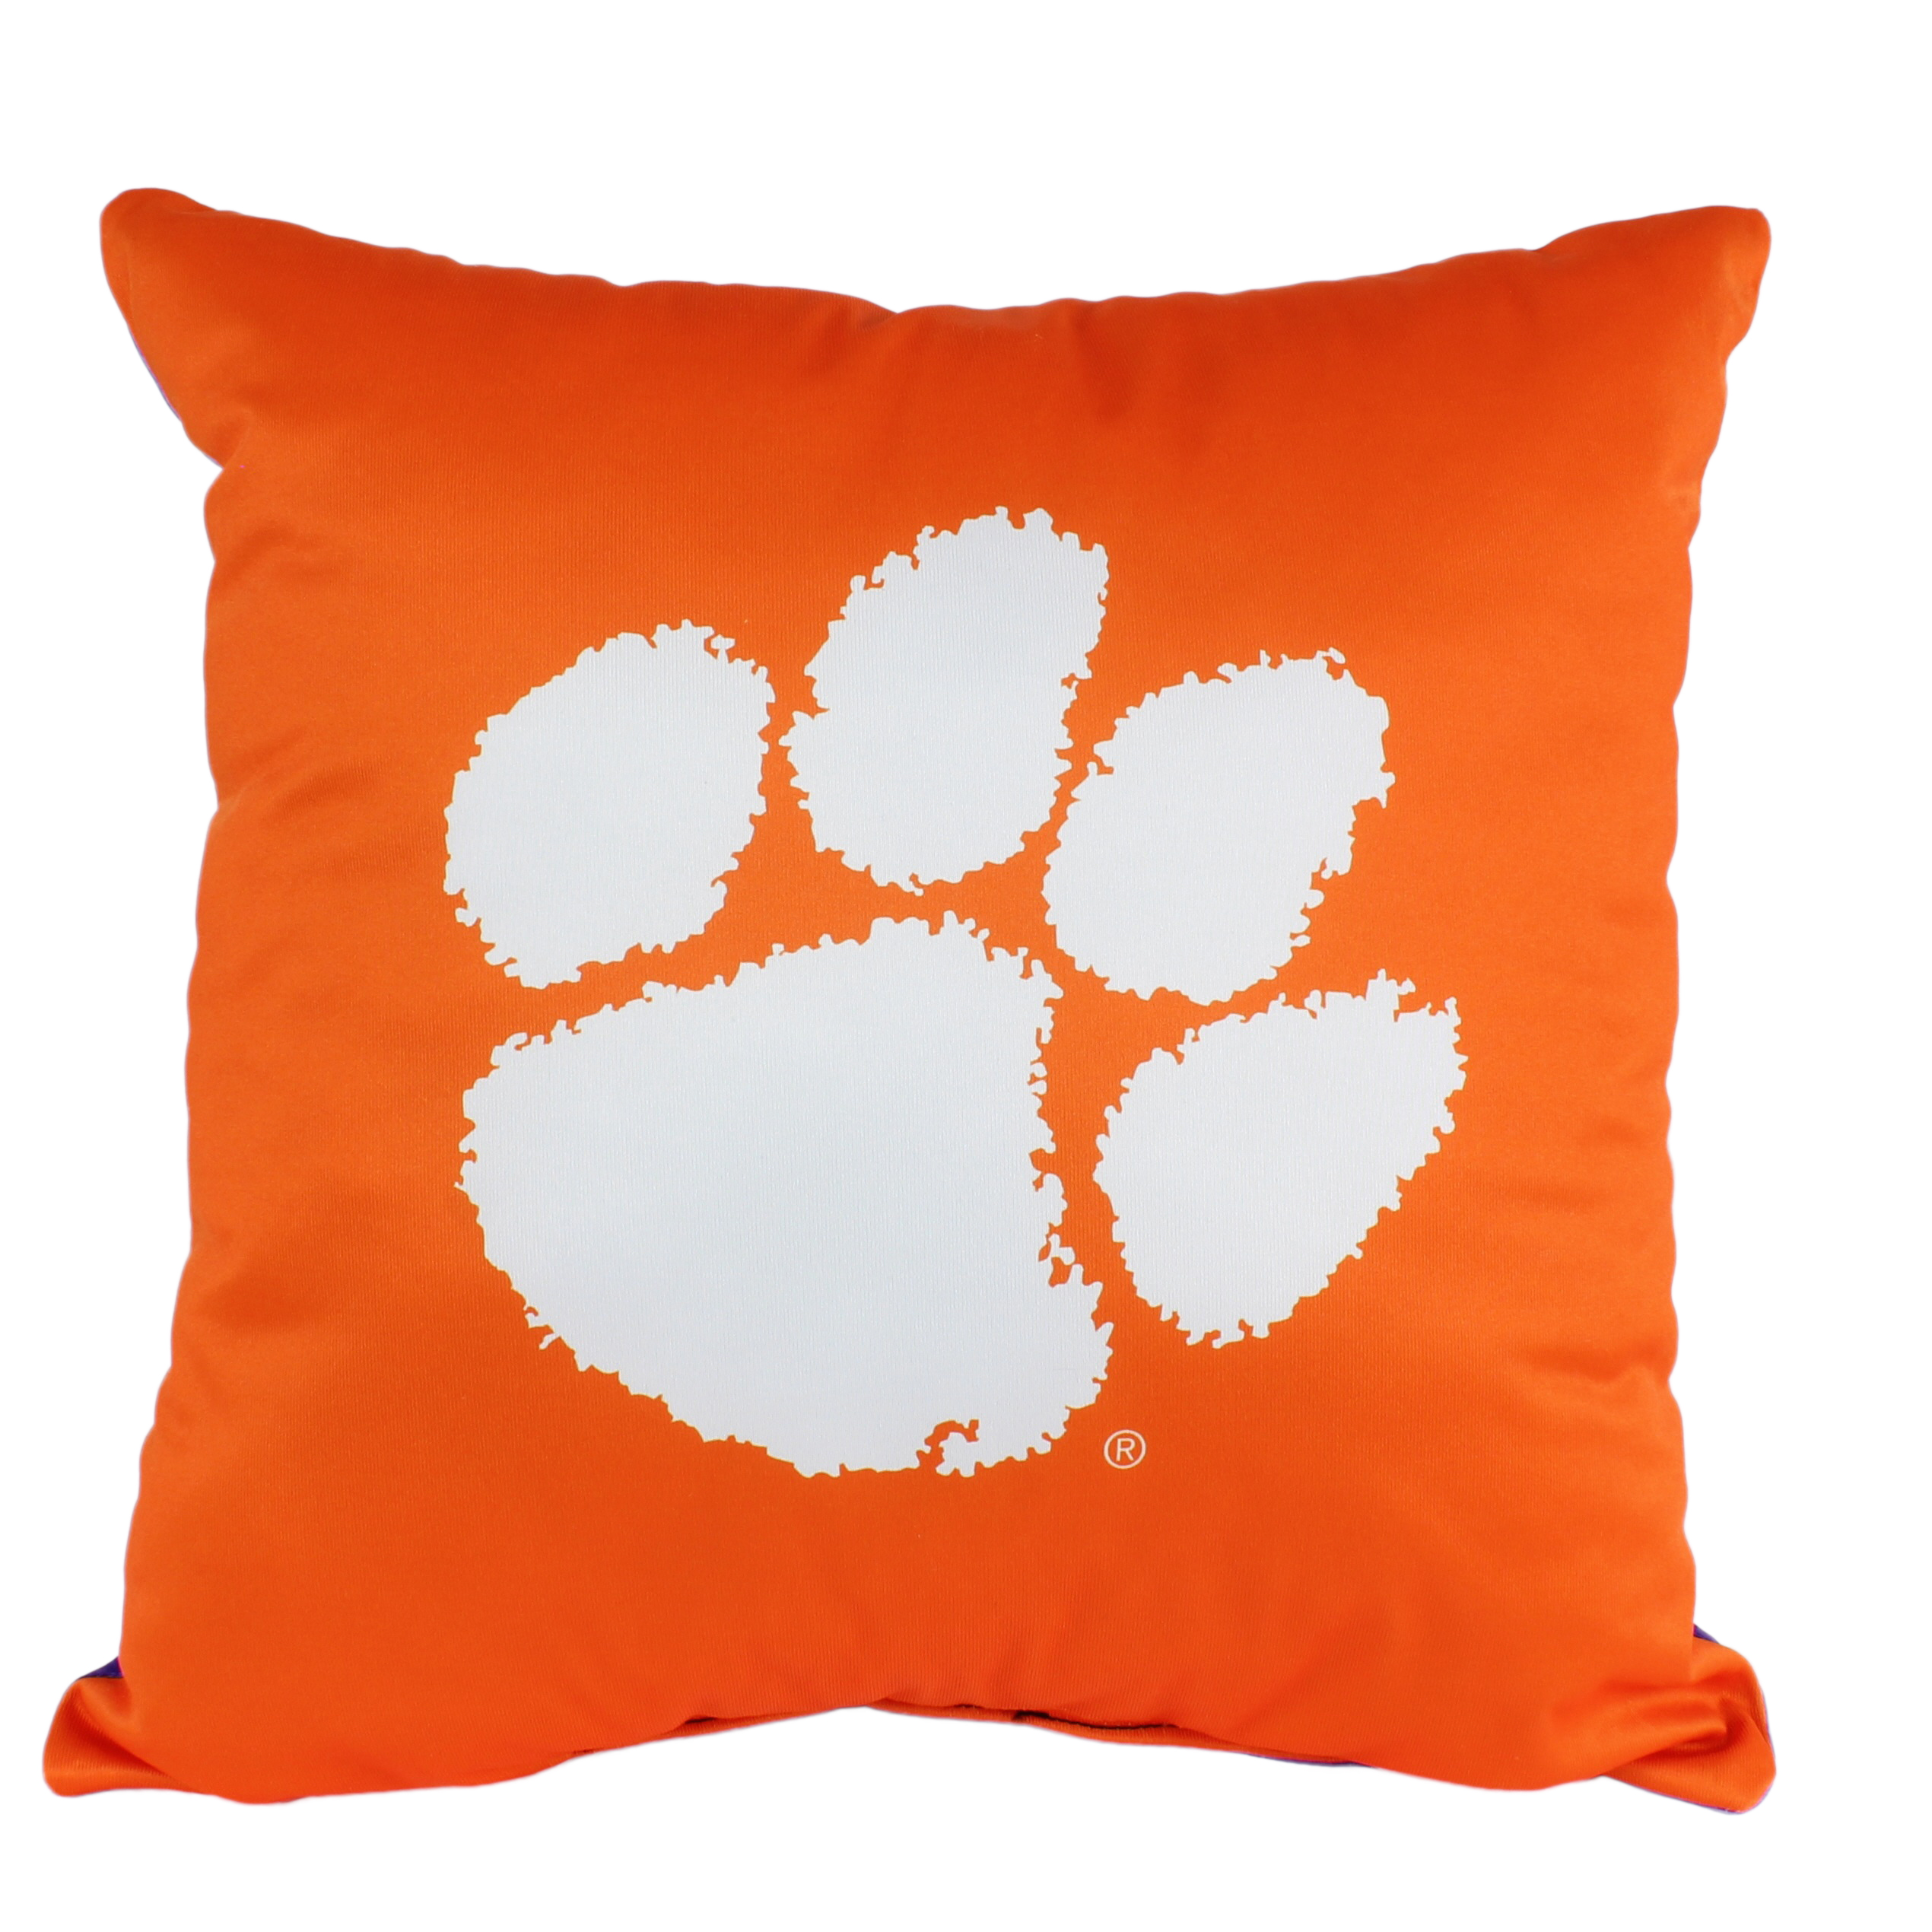 Clemson Tigers 16 inch Reversible Decorative Pillow - image 1 of 4